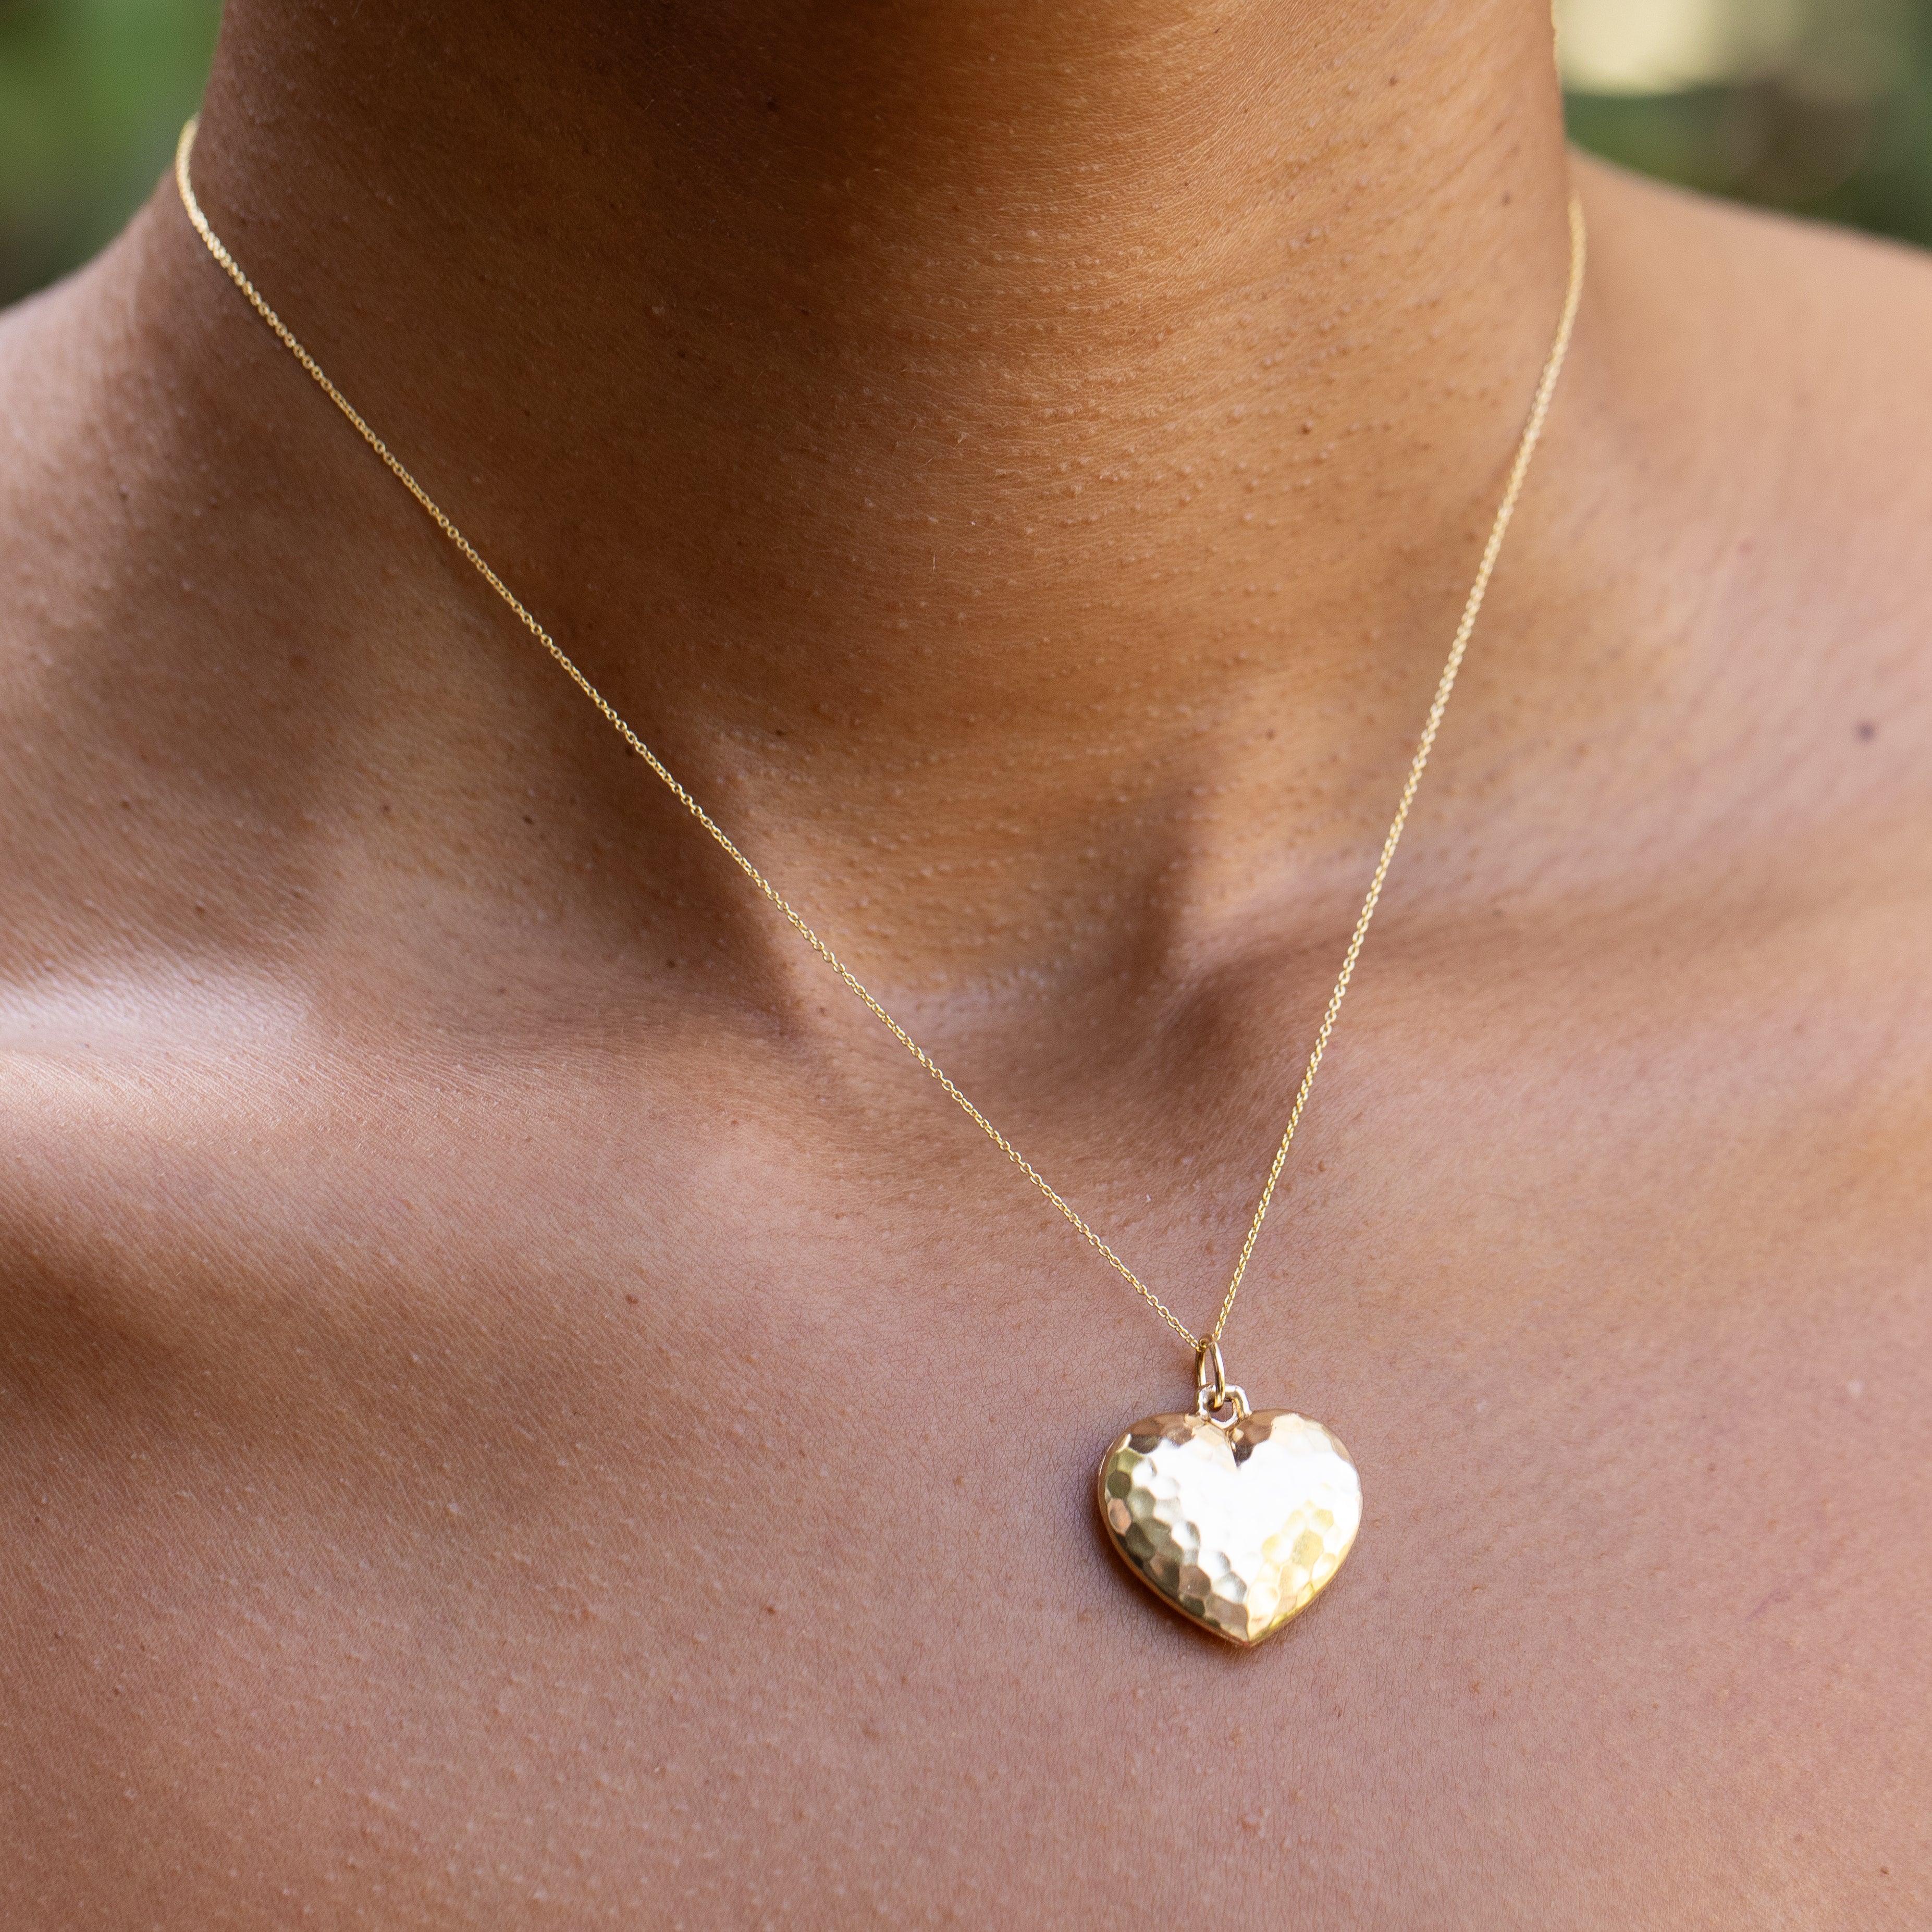 Large Hammered 14K Gold Heart Charm